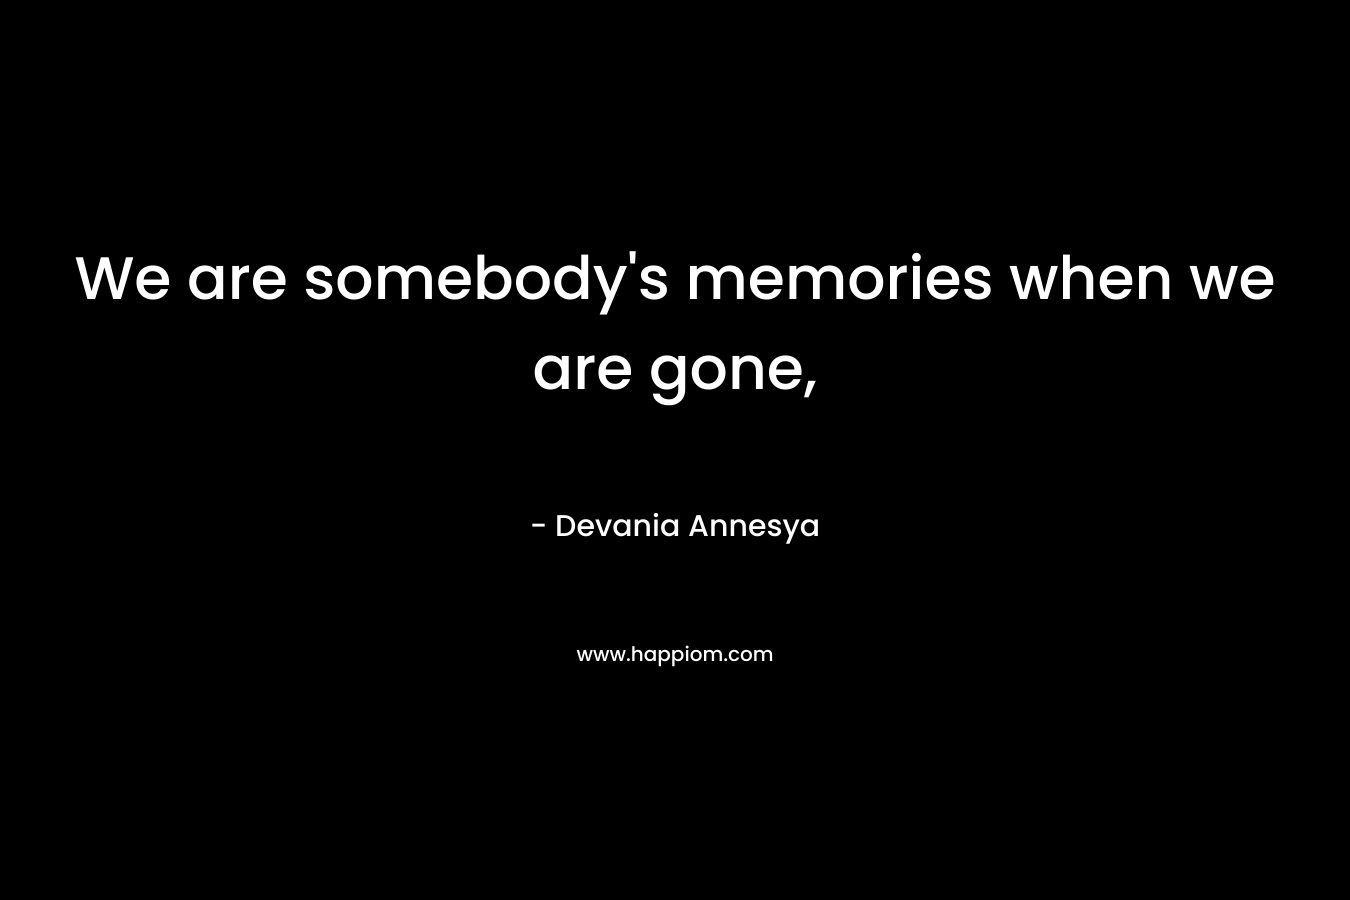 We are somebody’s memories when we are gone, – Devania Annesya